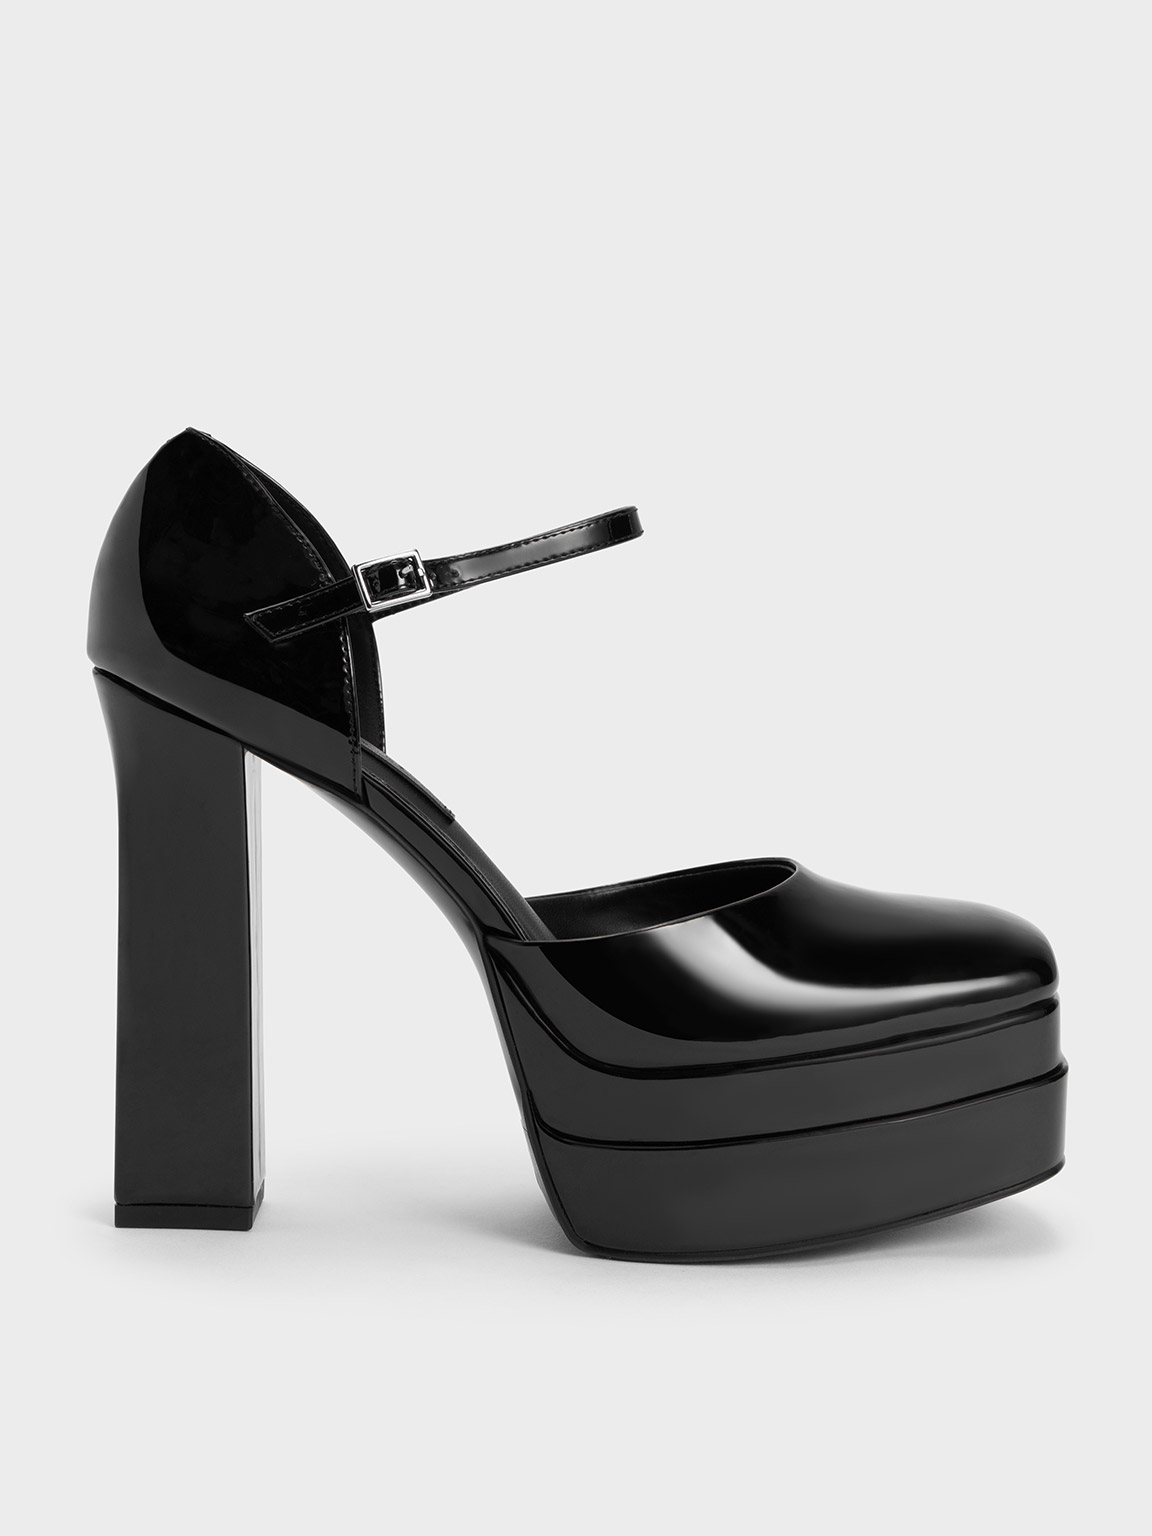 Charles & Keith - Patent Platform D'orsay Pumps In Black Patent